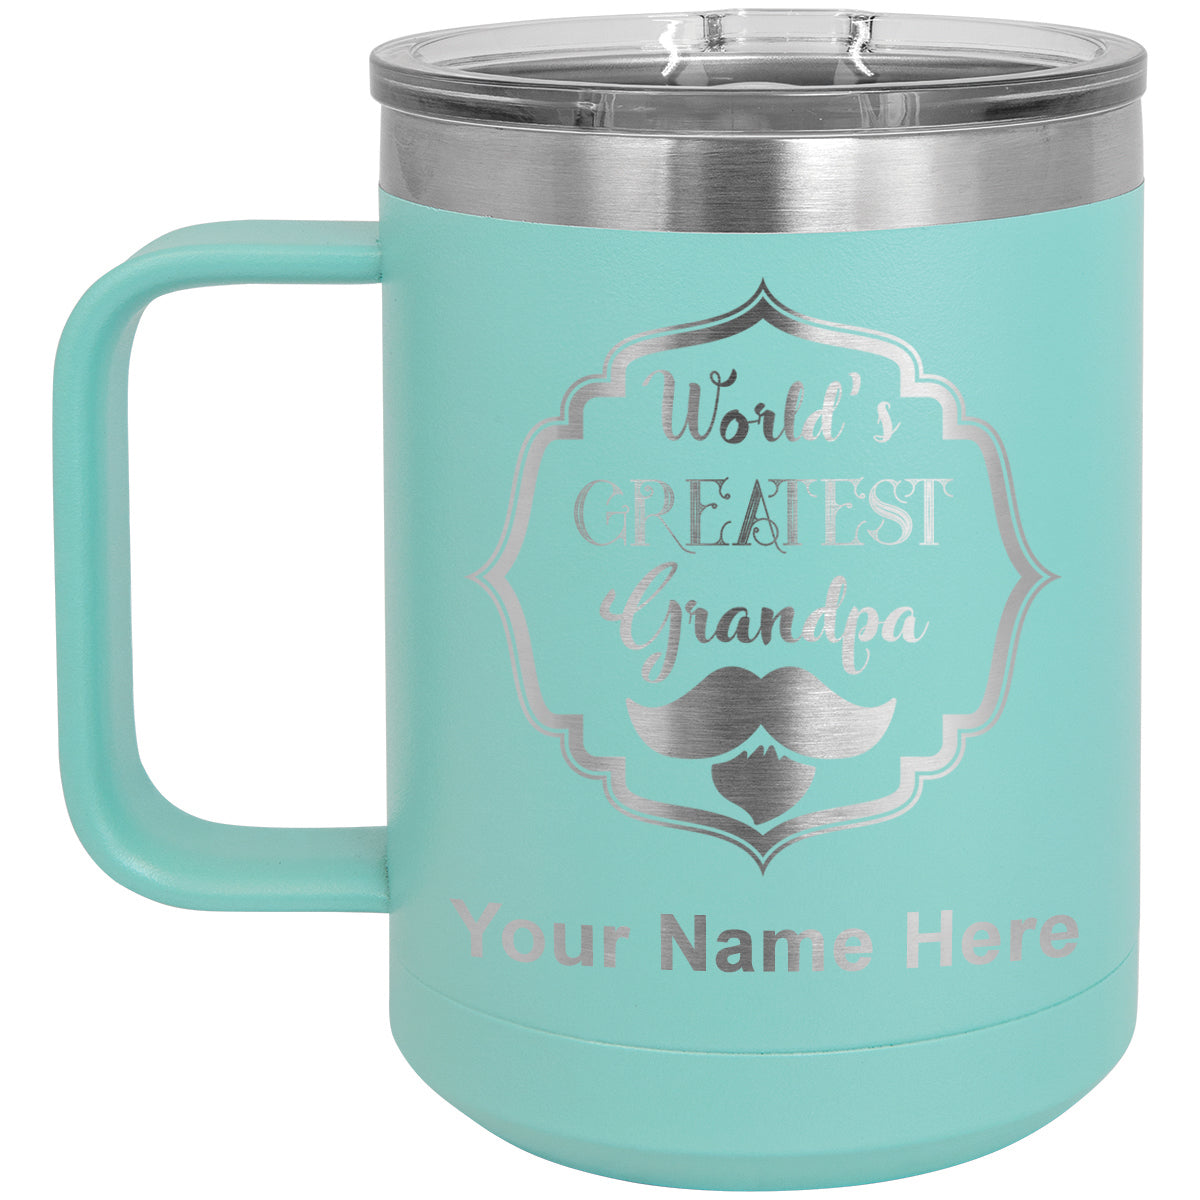 15oz Vacuum Insulated Coffee Mug, World's Greatest Grandpa, Personalized Engraving Included